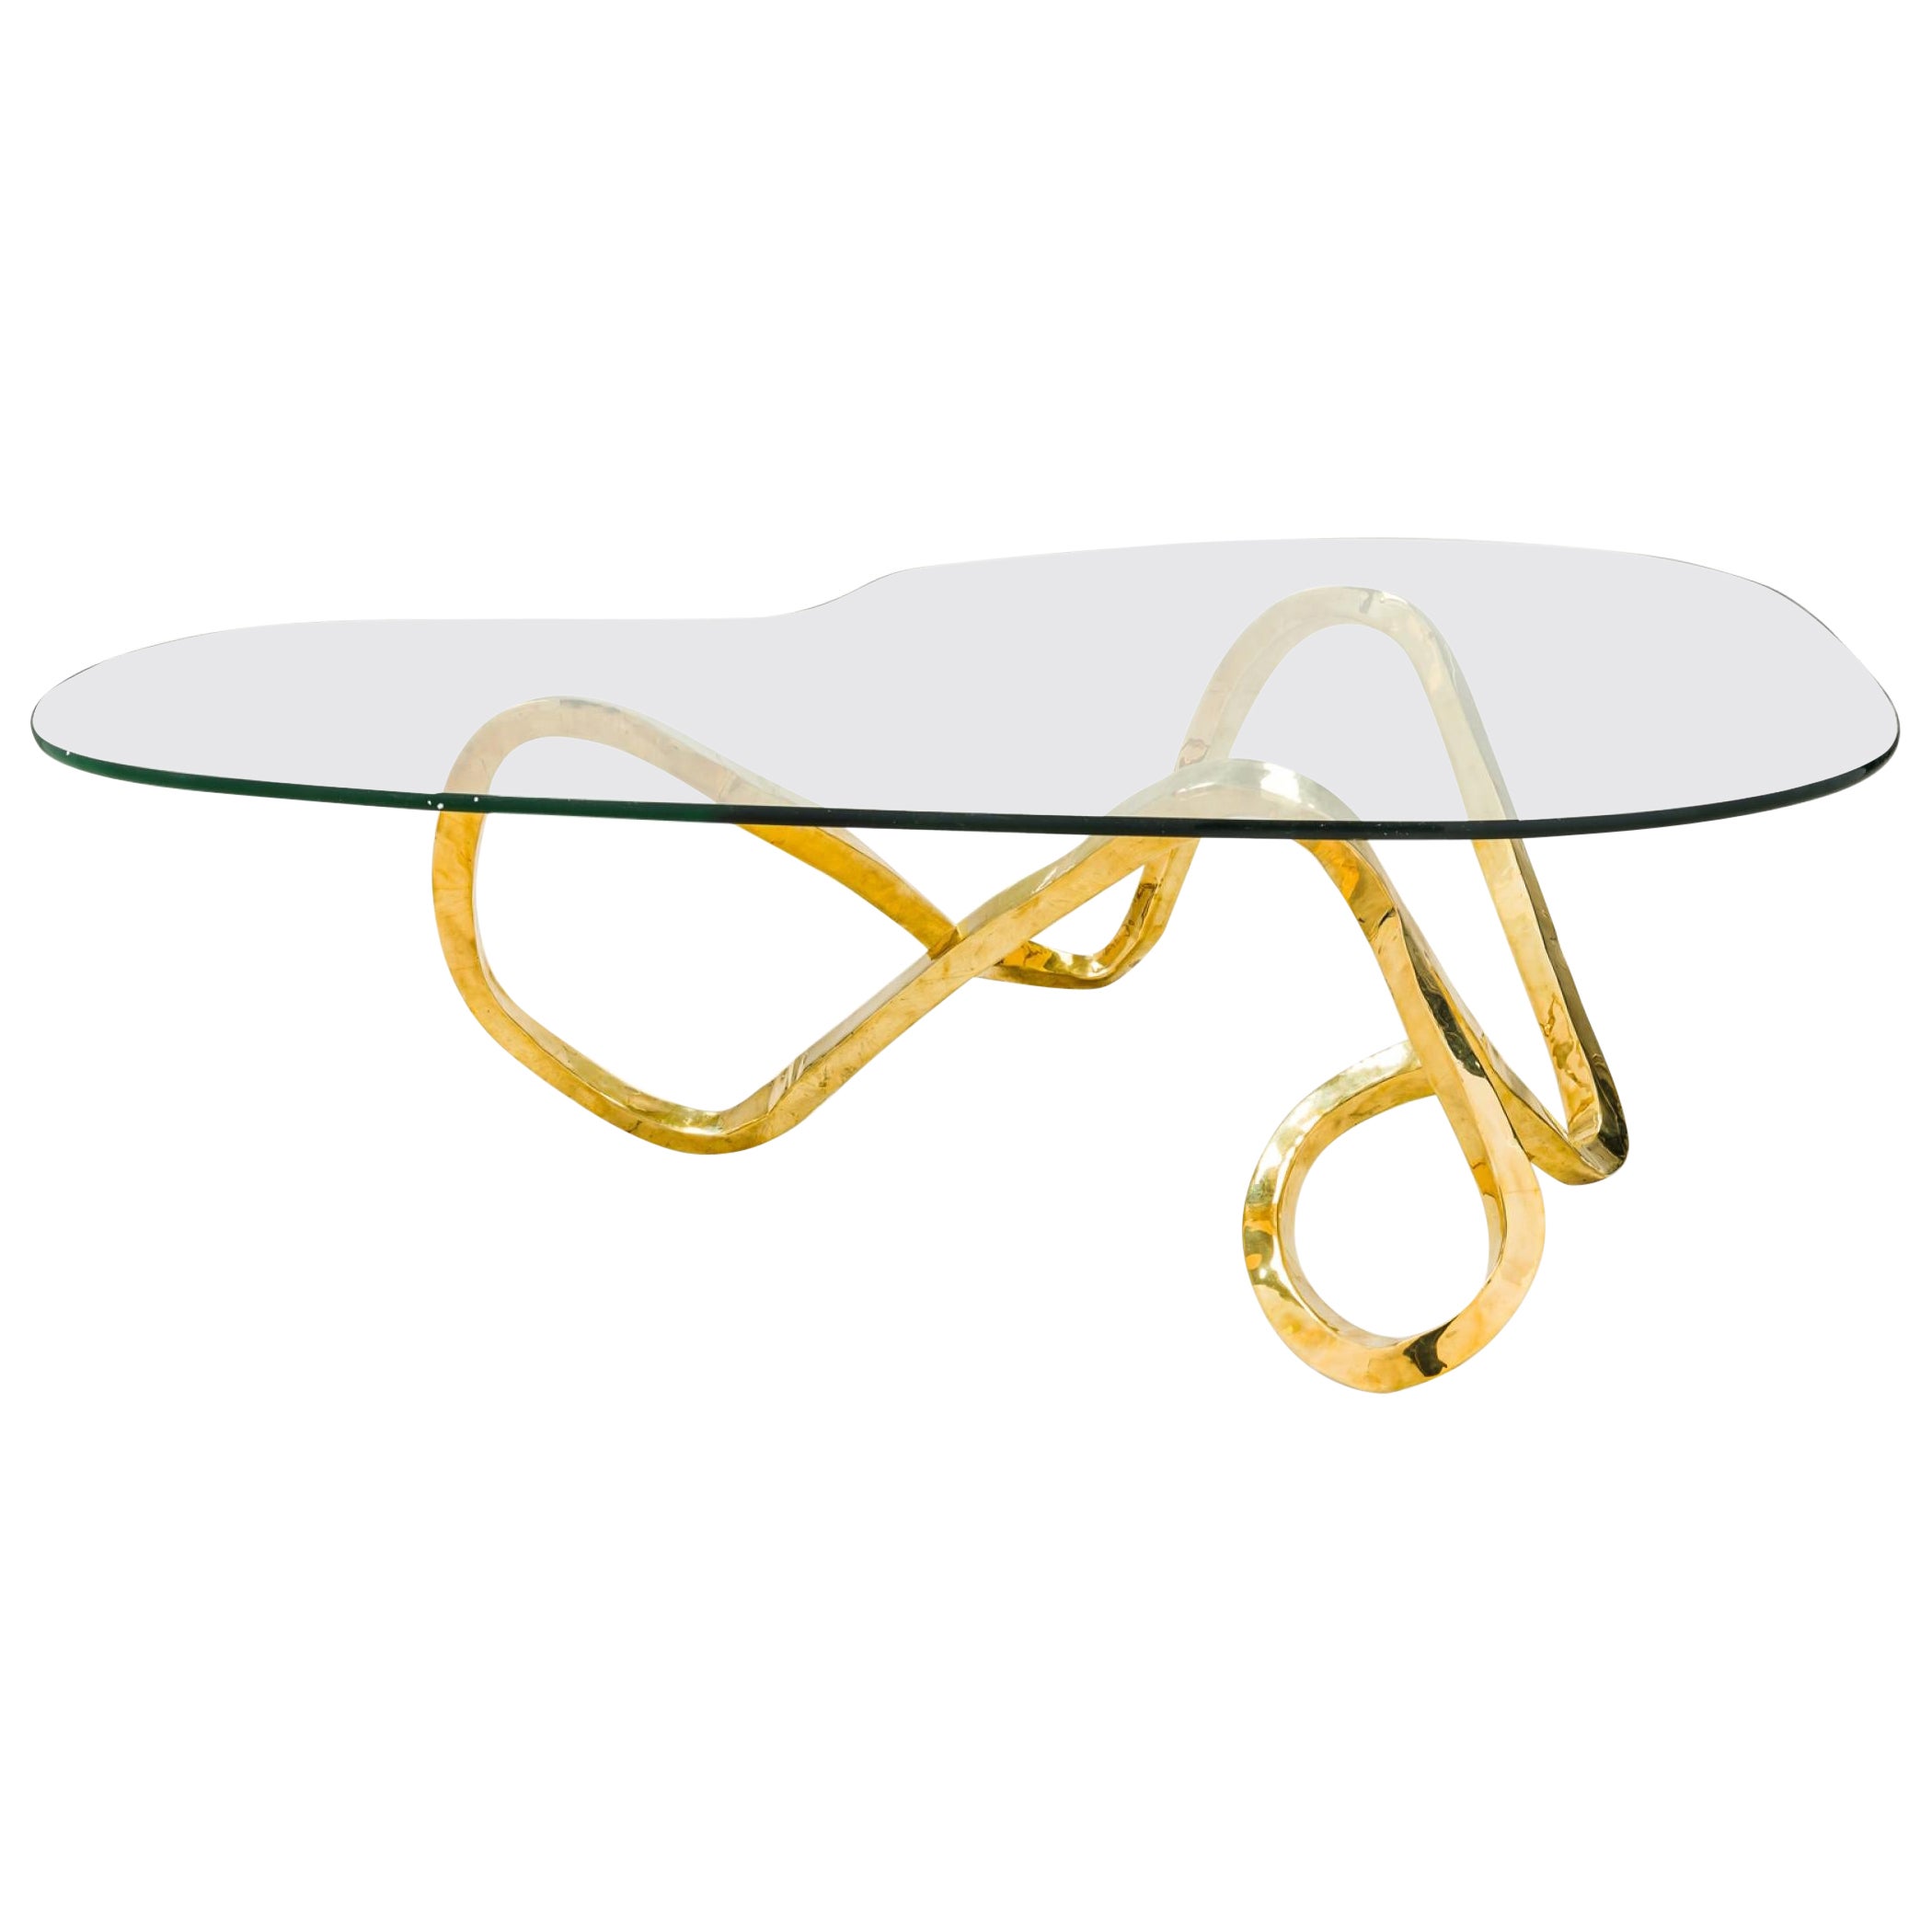 "Porto" Organic Loop Design Polished Bronze and Glass Coffee Tables